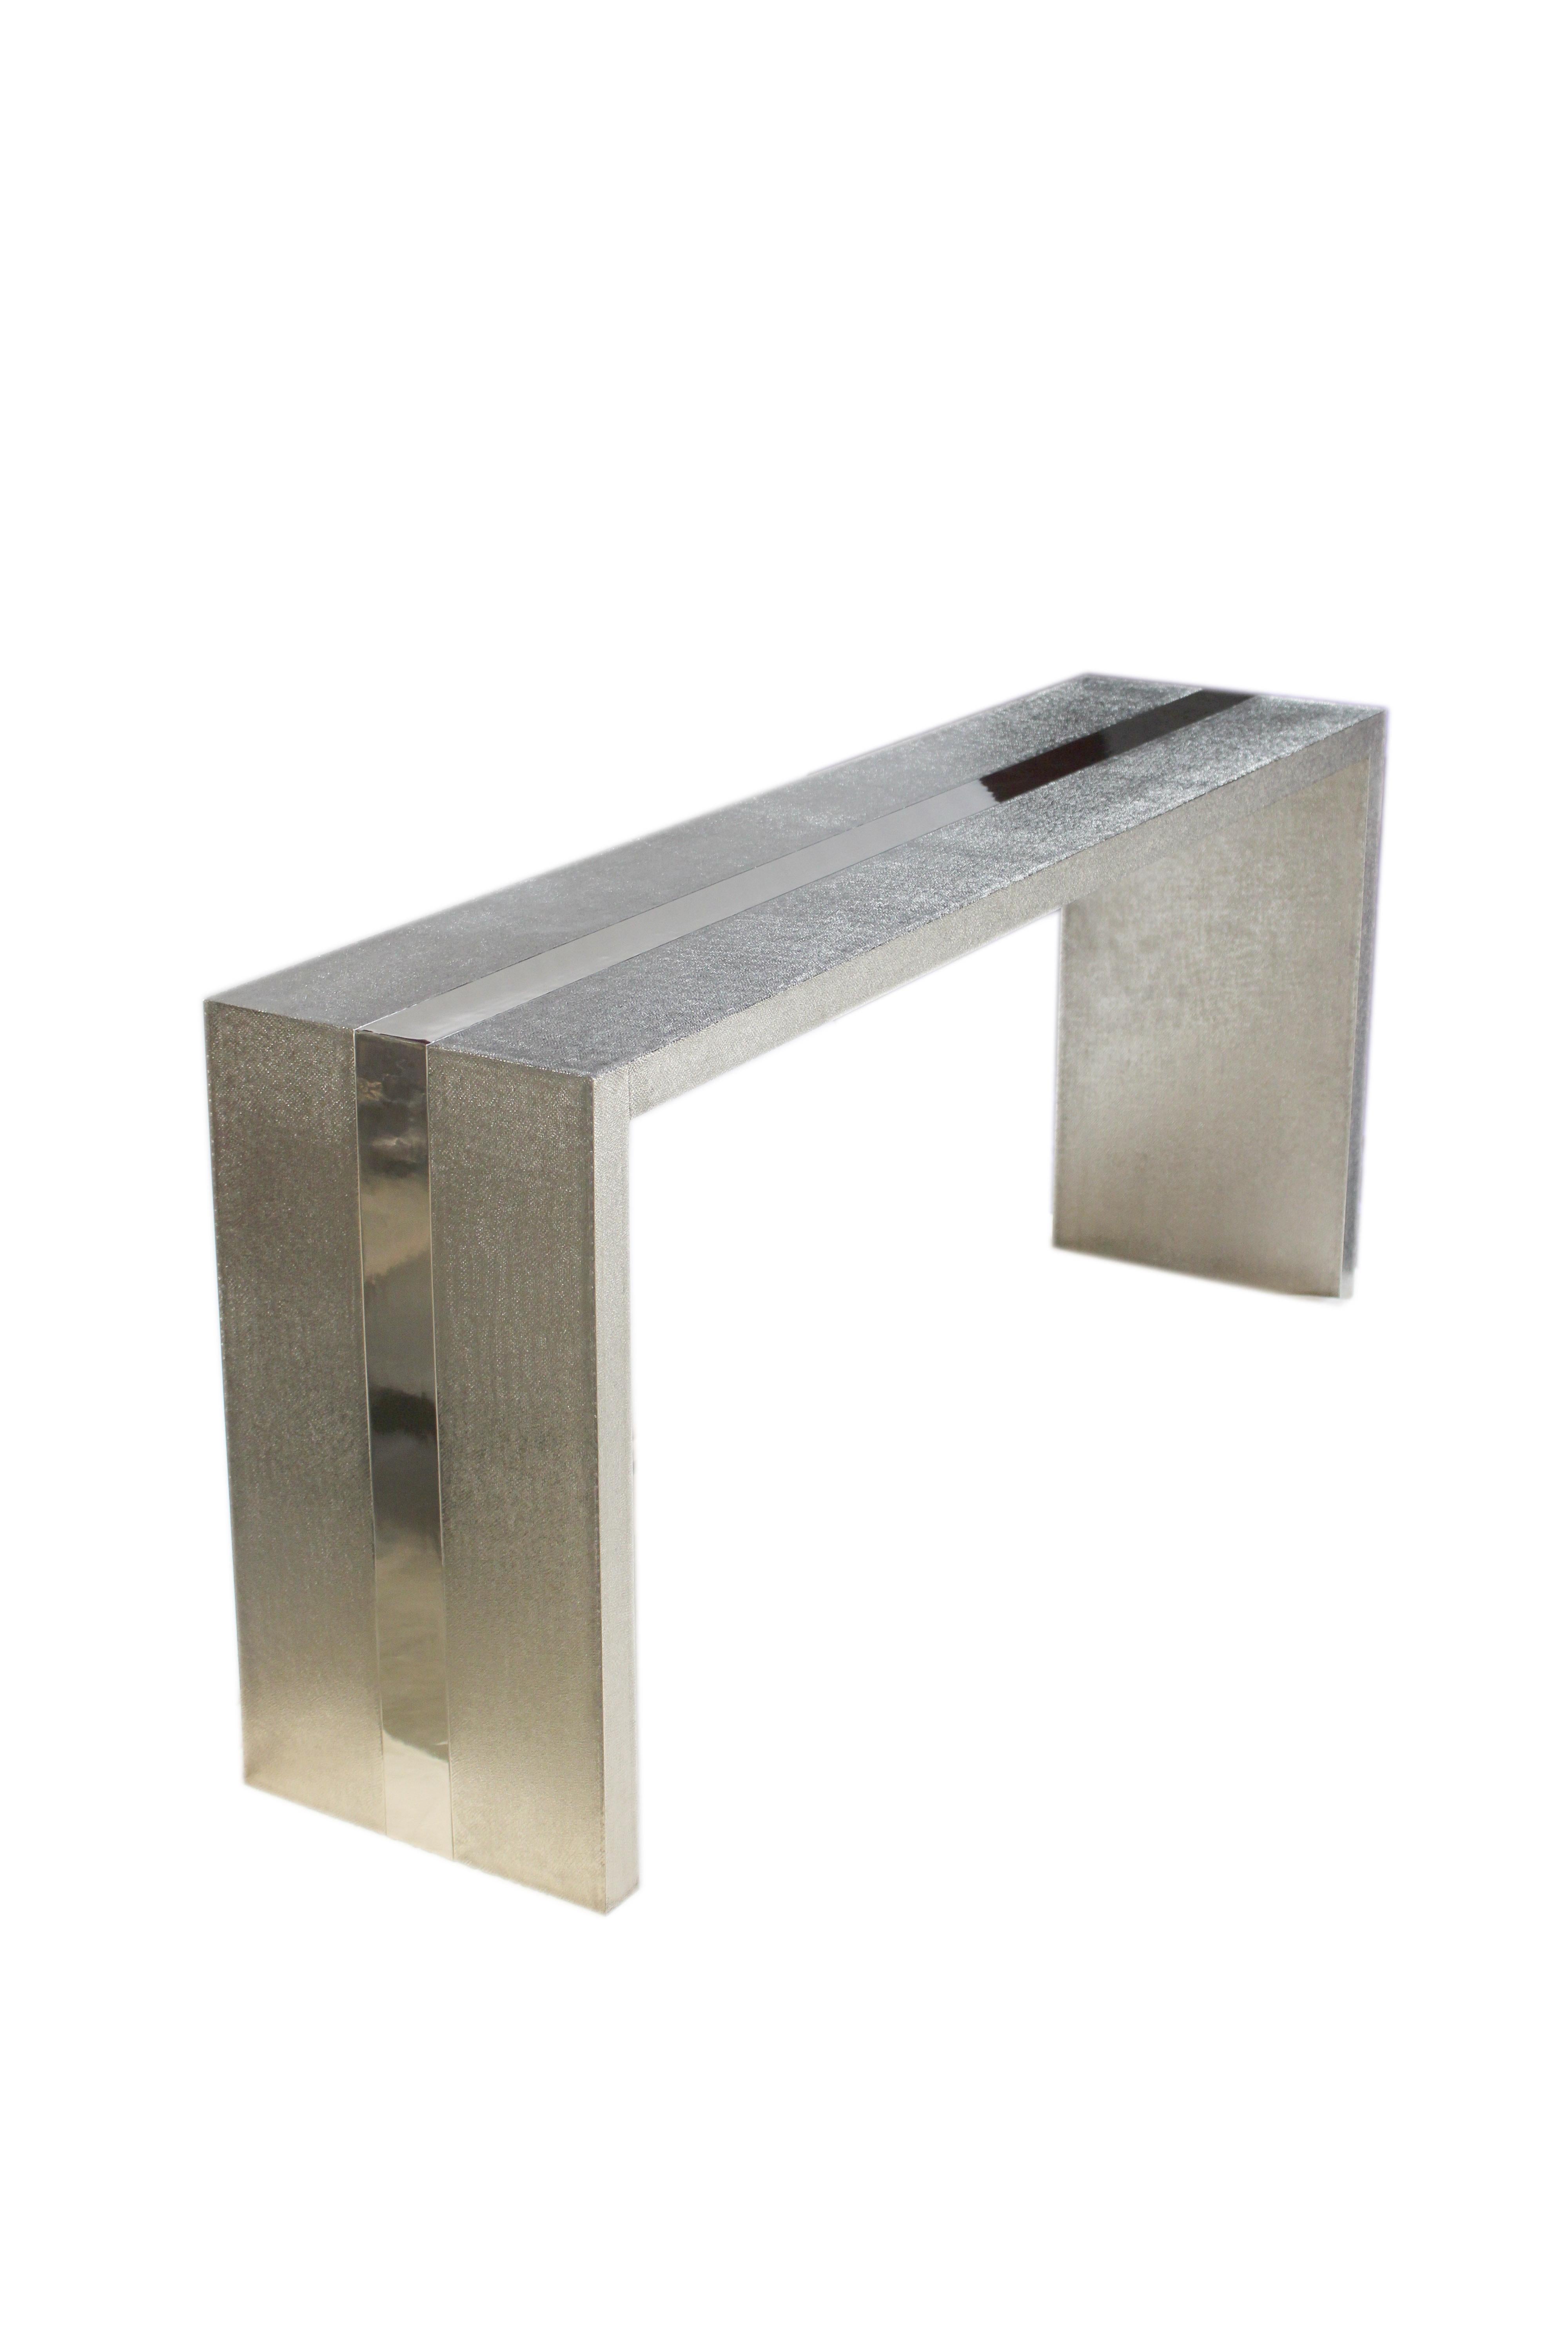 Art Deco Rectangular Console Tables Mid. Hammered White Bronze by Alison Spear For Sale 6